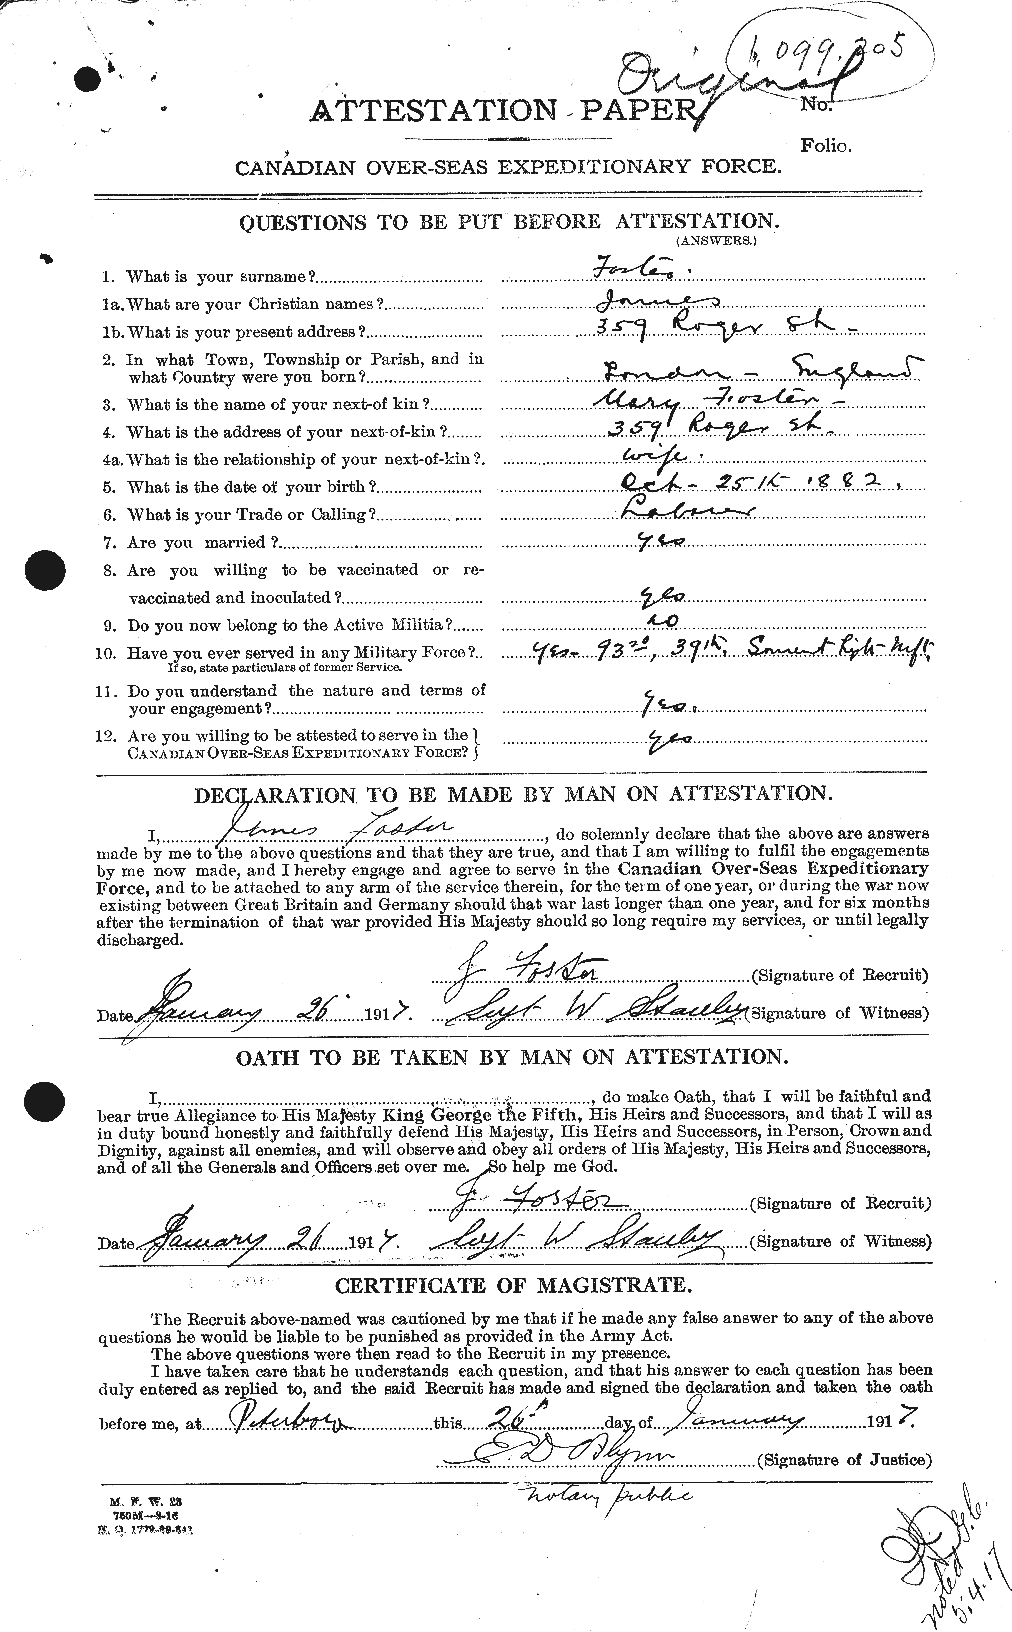 Personnel Records of the First World War - CEF 333277a